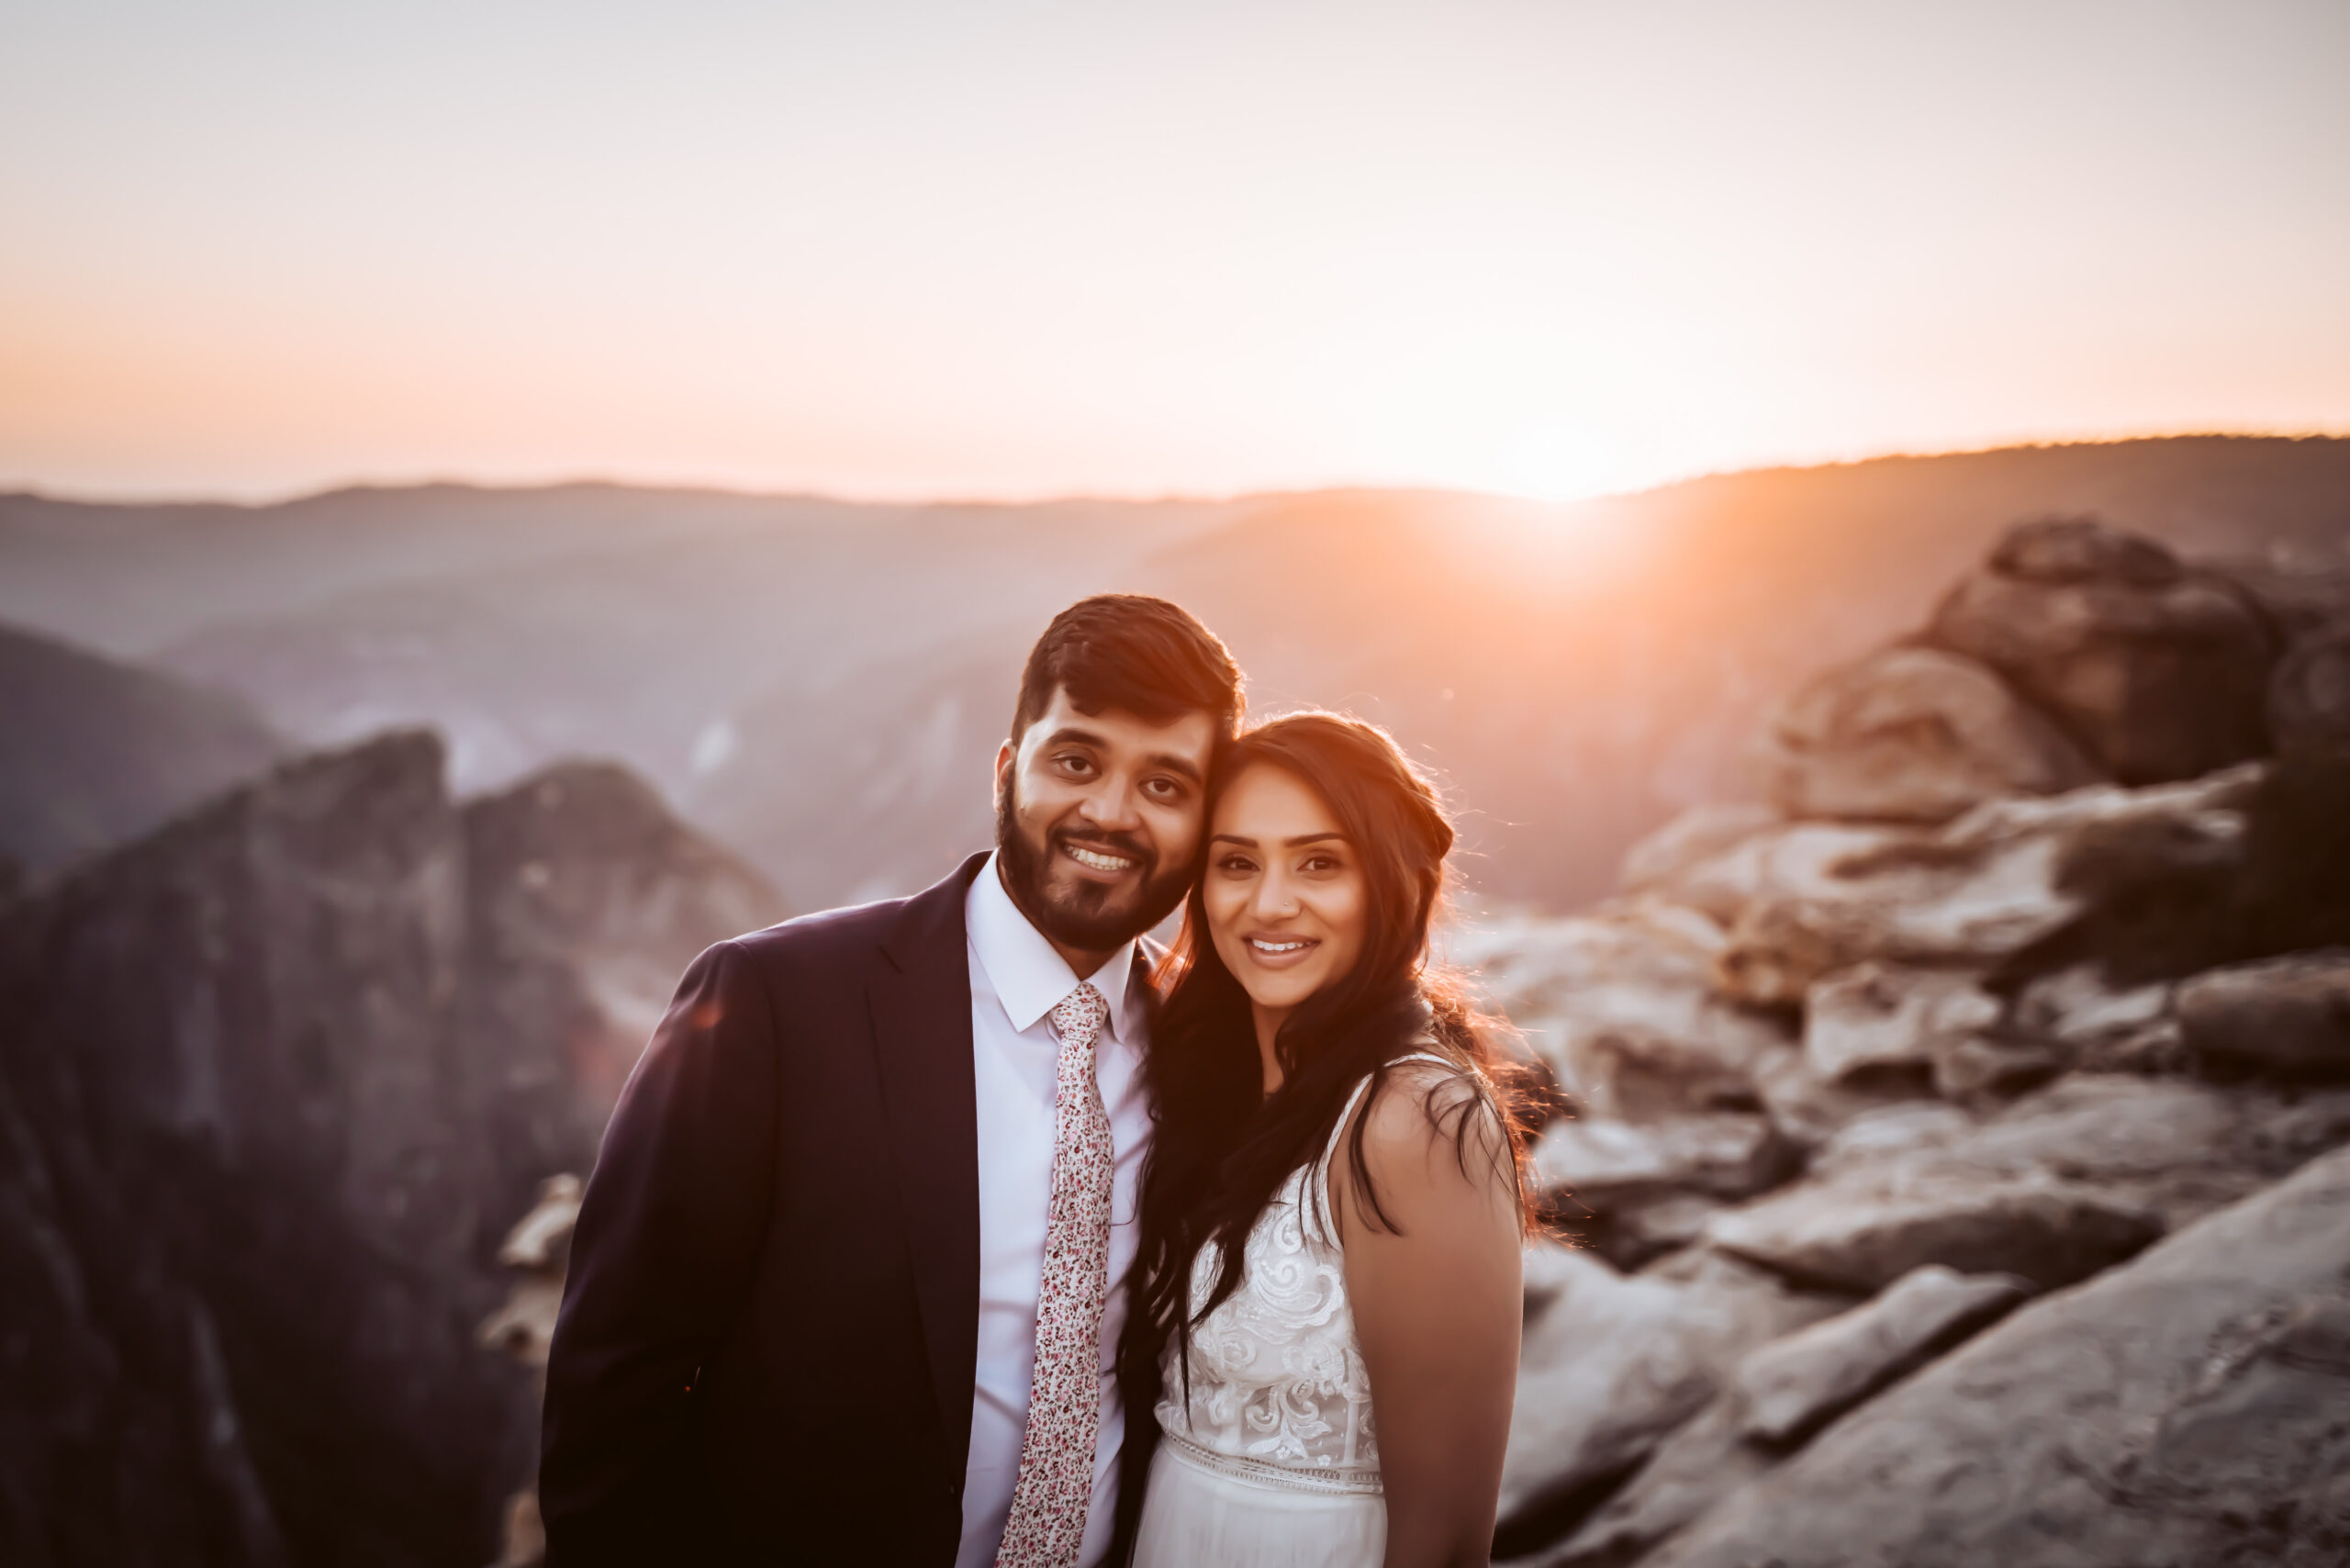 the bride and groom looking at the cameral with the sunset in the backdrop overlooking Yosemite Valley and the mountains